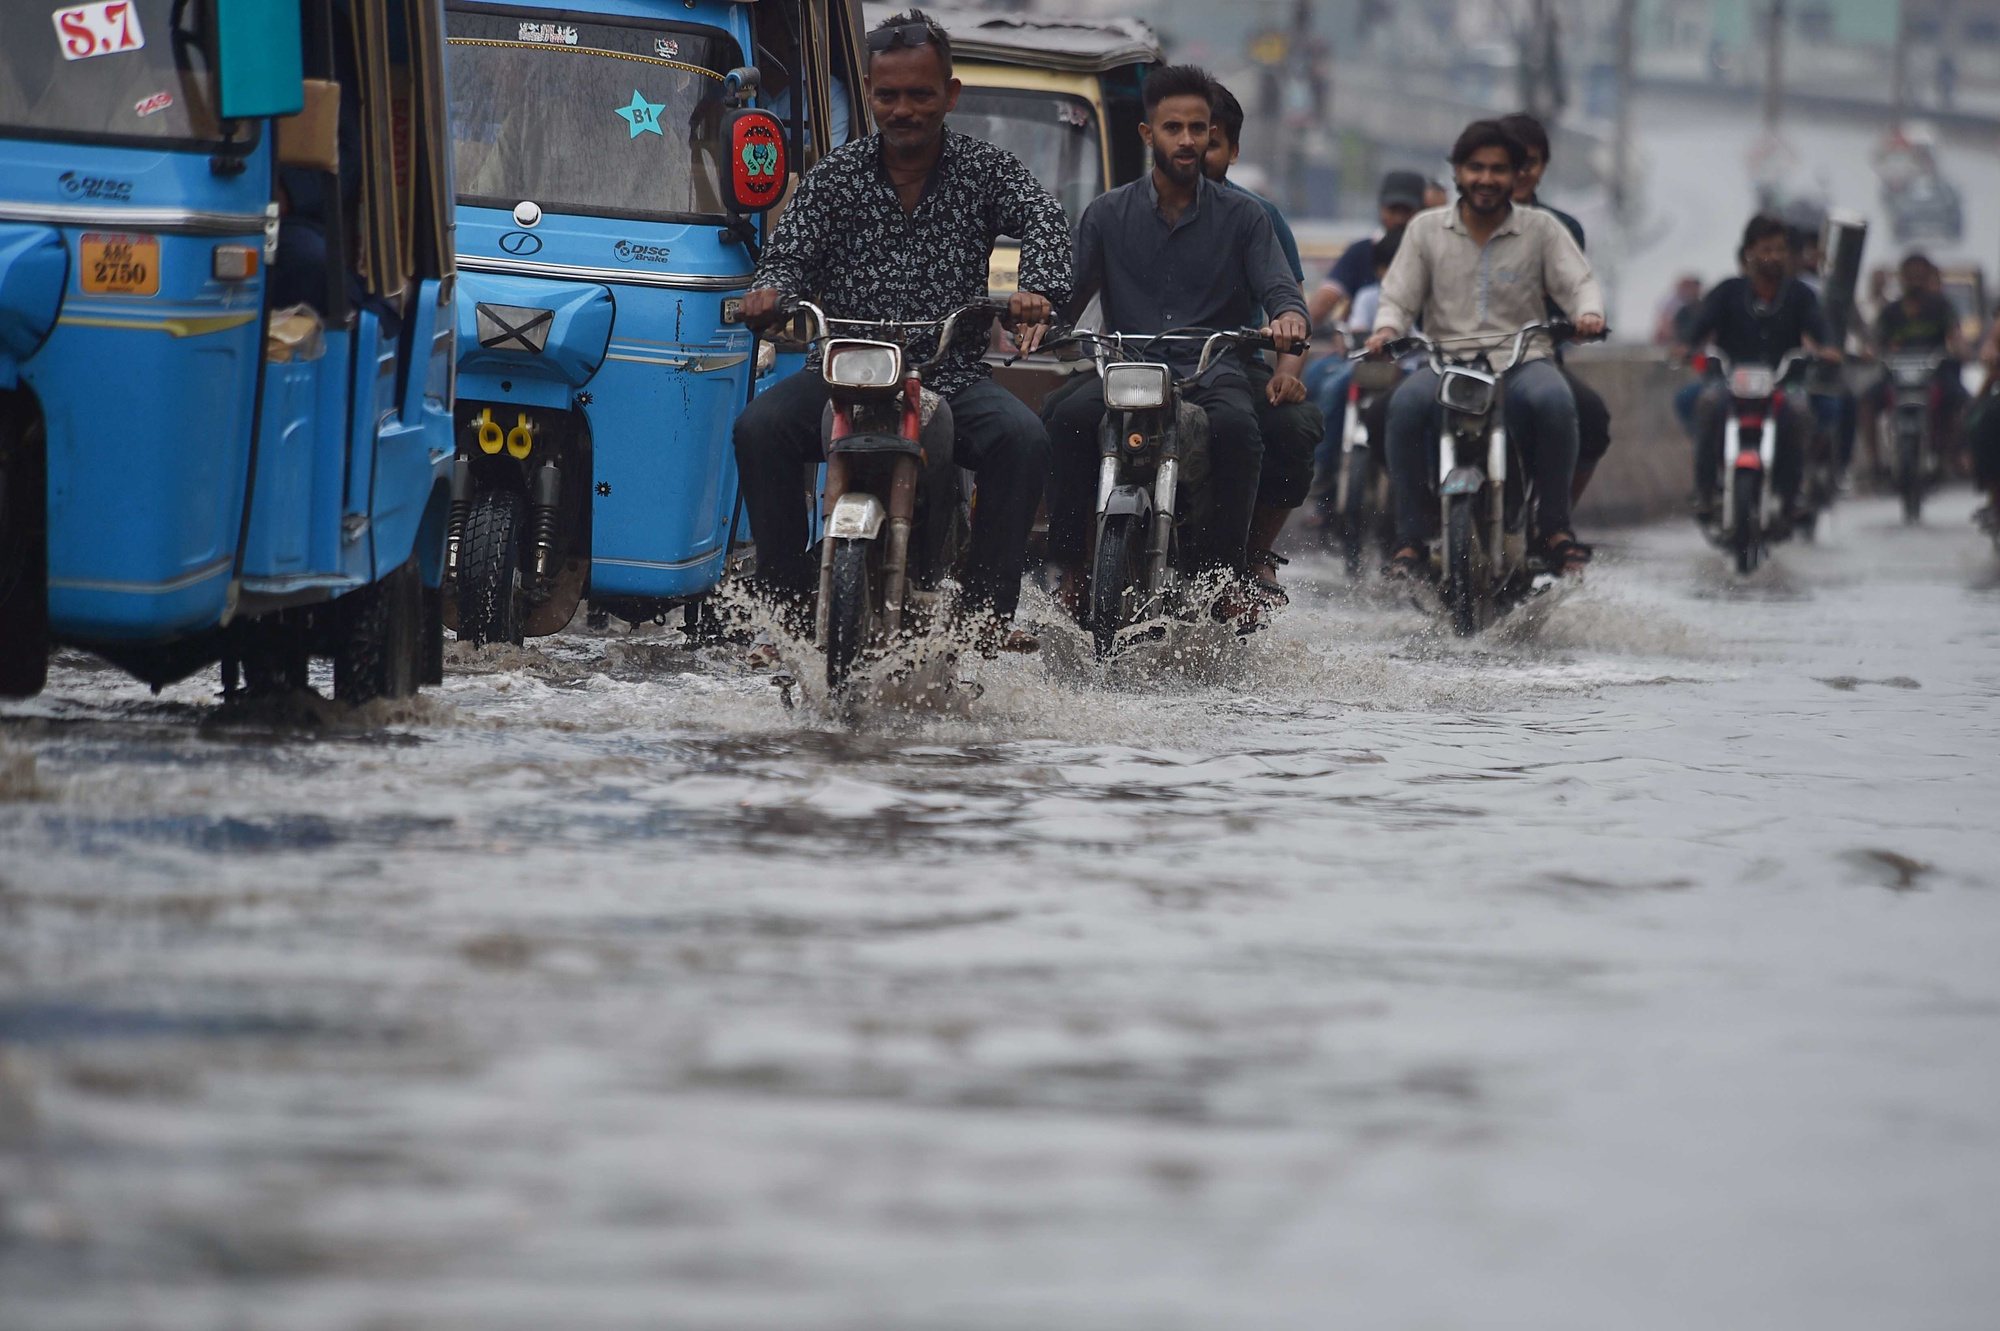 epa11278190 People ride motorcycles during heavy rain in Karachi, Pakistan, 14 April 2024. At least 29 people have died and another seven have been injured in the last two days due to lightning strikes and incidents related to the heavy rains affecting several provinces of Pakistan, rescue officials said. In total, 17 people died in the northeastern province of Punjab, in addition to eight deaths in southern Balochistan and four in northern Khyber Pakhtunkhwa.  EPA/SHAHZAIB AKBER